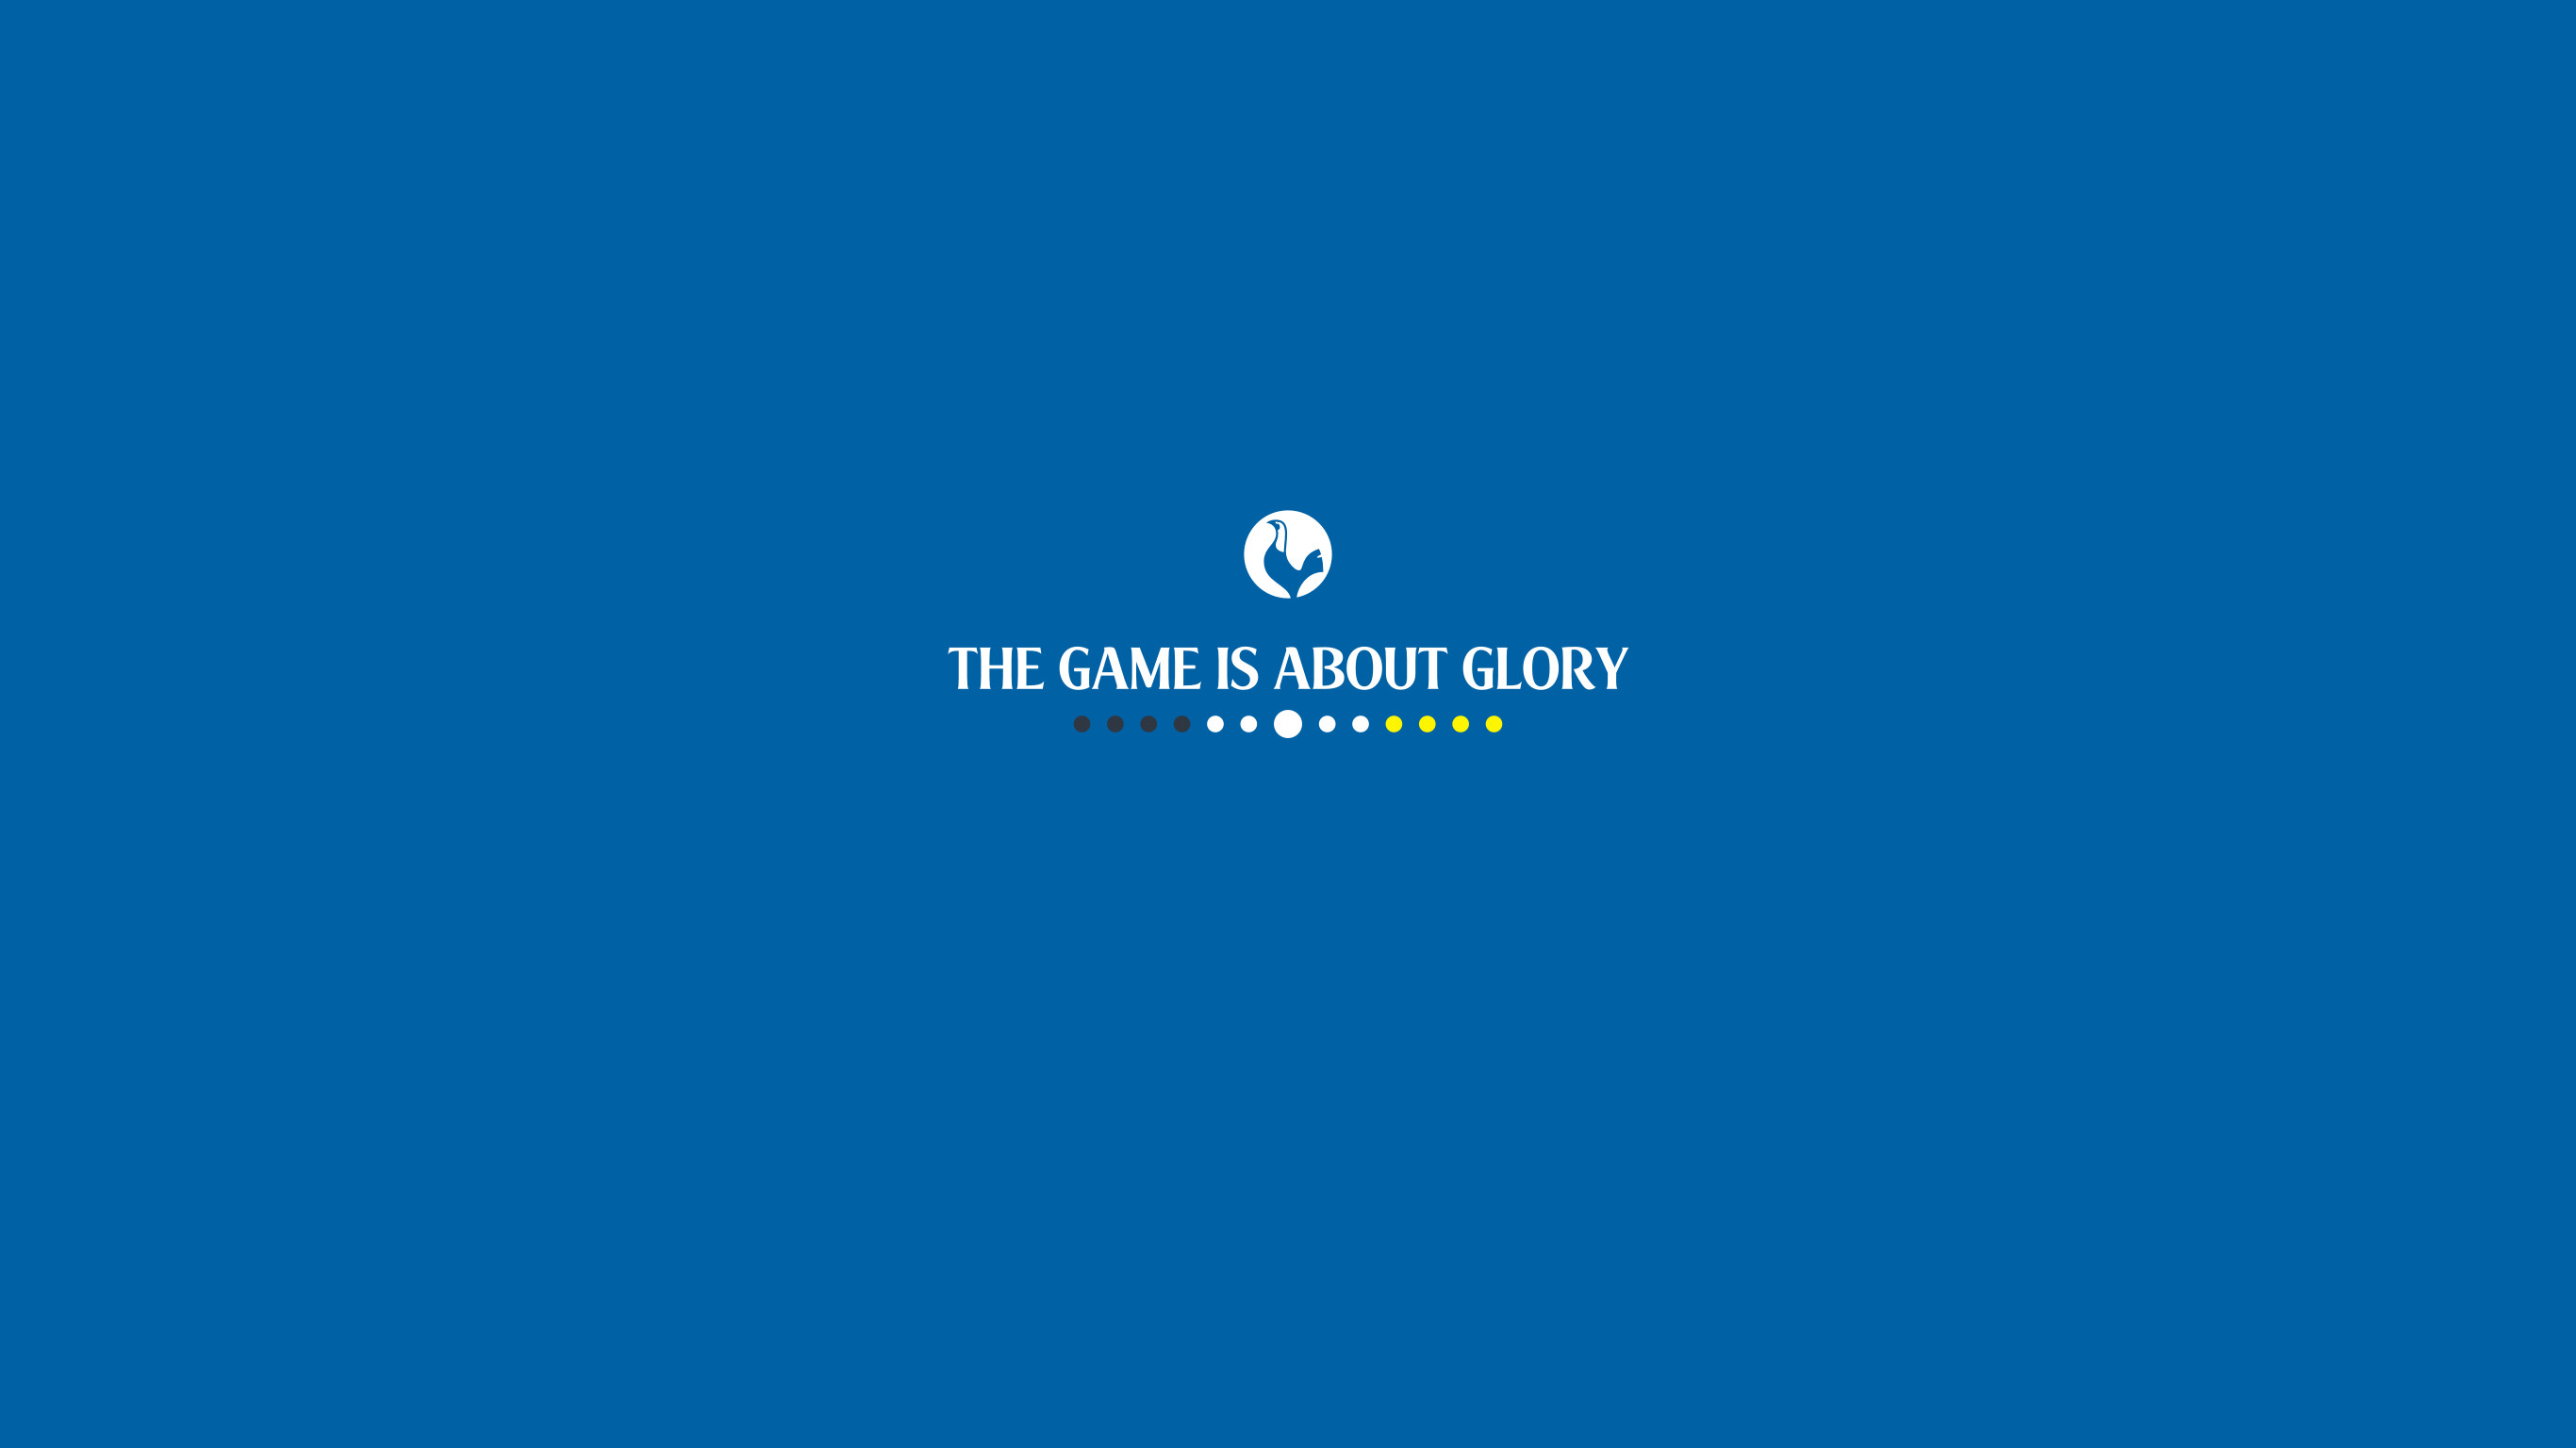 The Game Is About Glory simple Tottenham Hotspur wallpaper by Hamzah Zein